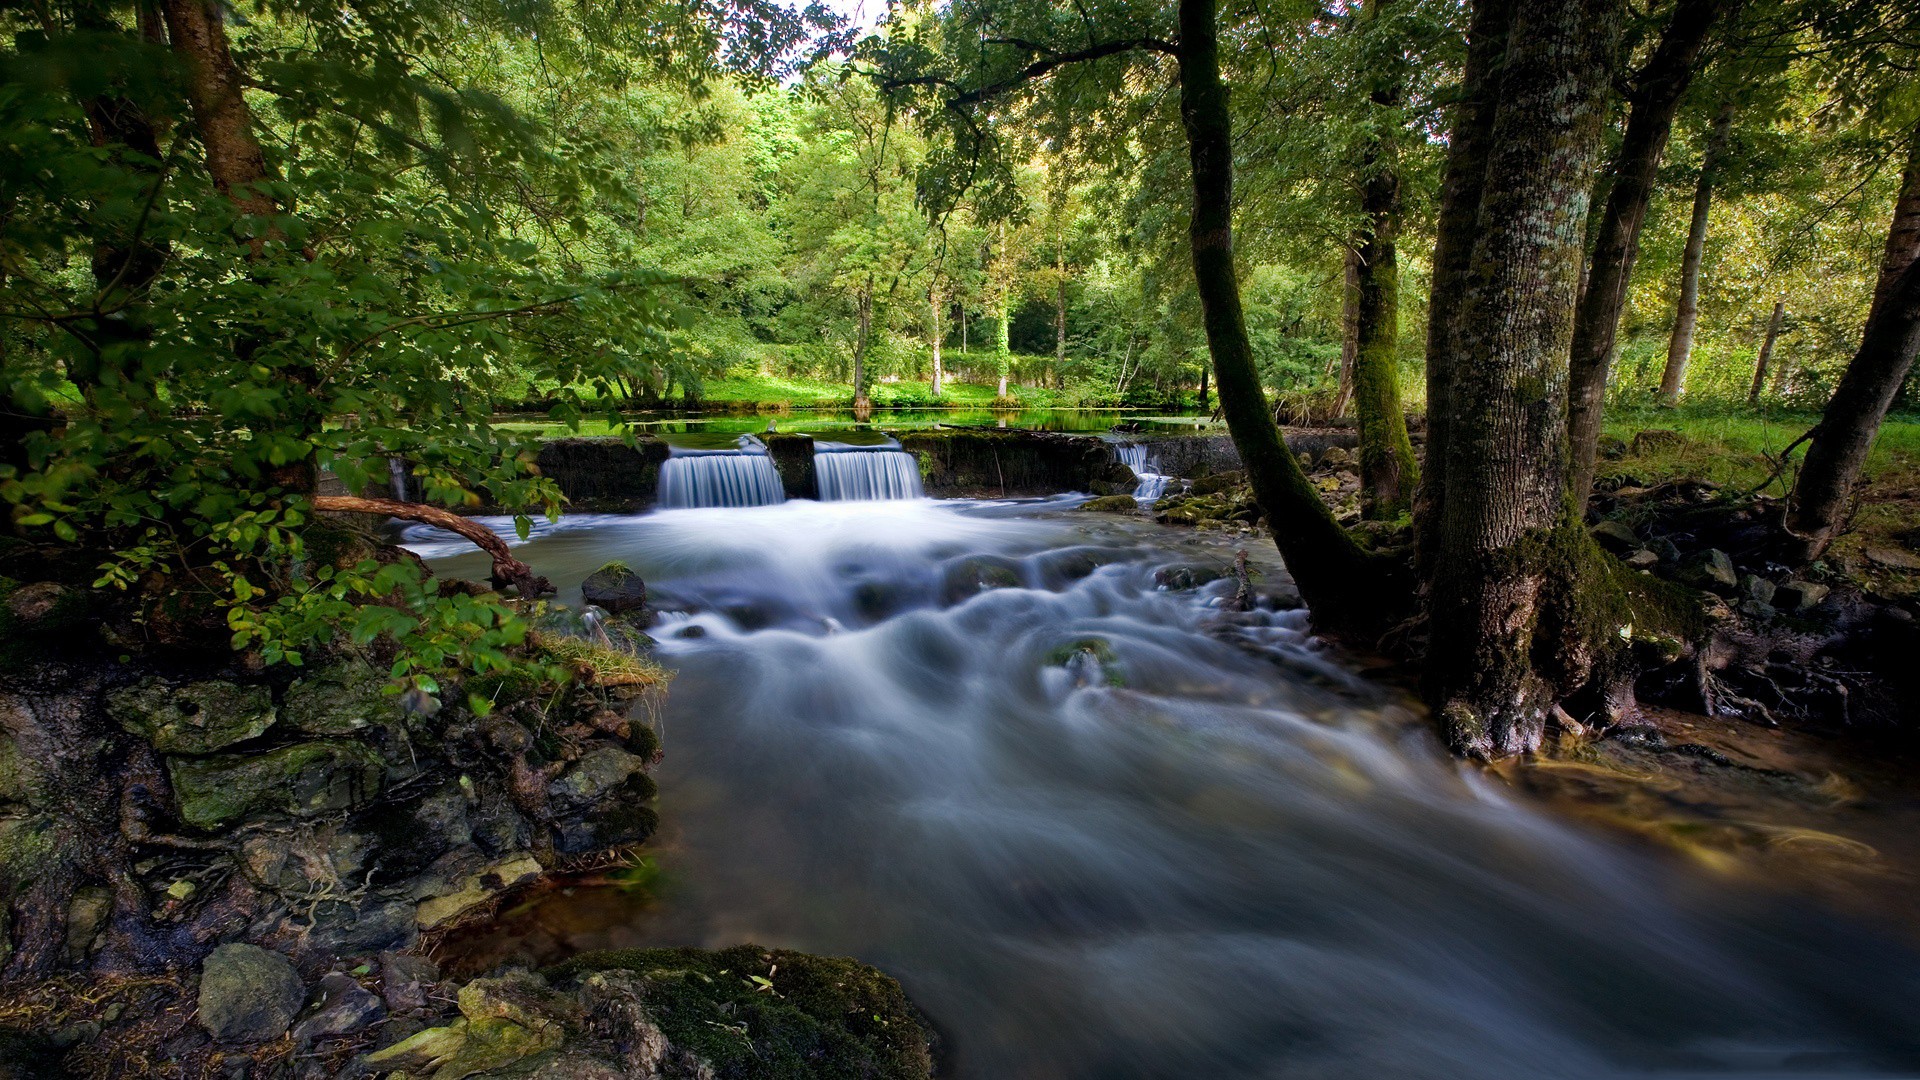 Long Exposure River Landscape Nature Without People 1920x1080